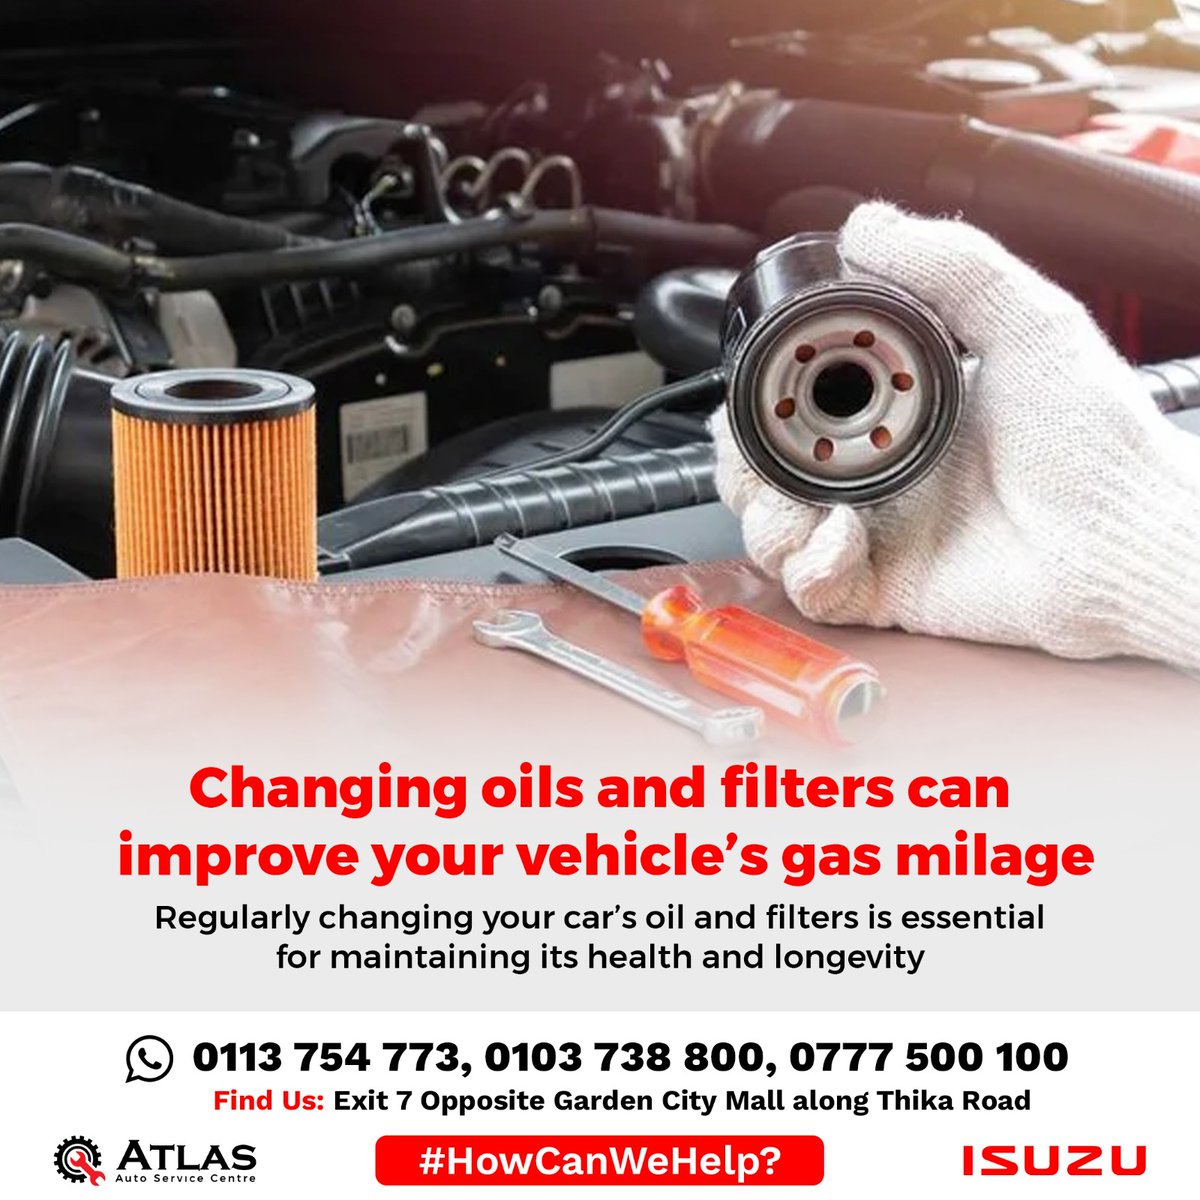 Rev up your ride and save some cash! 💨✨ Changing oils and filters can unlock your vehicle's hidden potential and boost that gas mileage like never before! 🚗💯 Visit Us Today @Atlasautocentre for your vehicle oil change. #howcanwehelp #OptimalPerformance #SavingsOnWheels